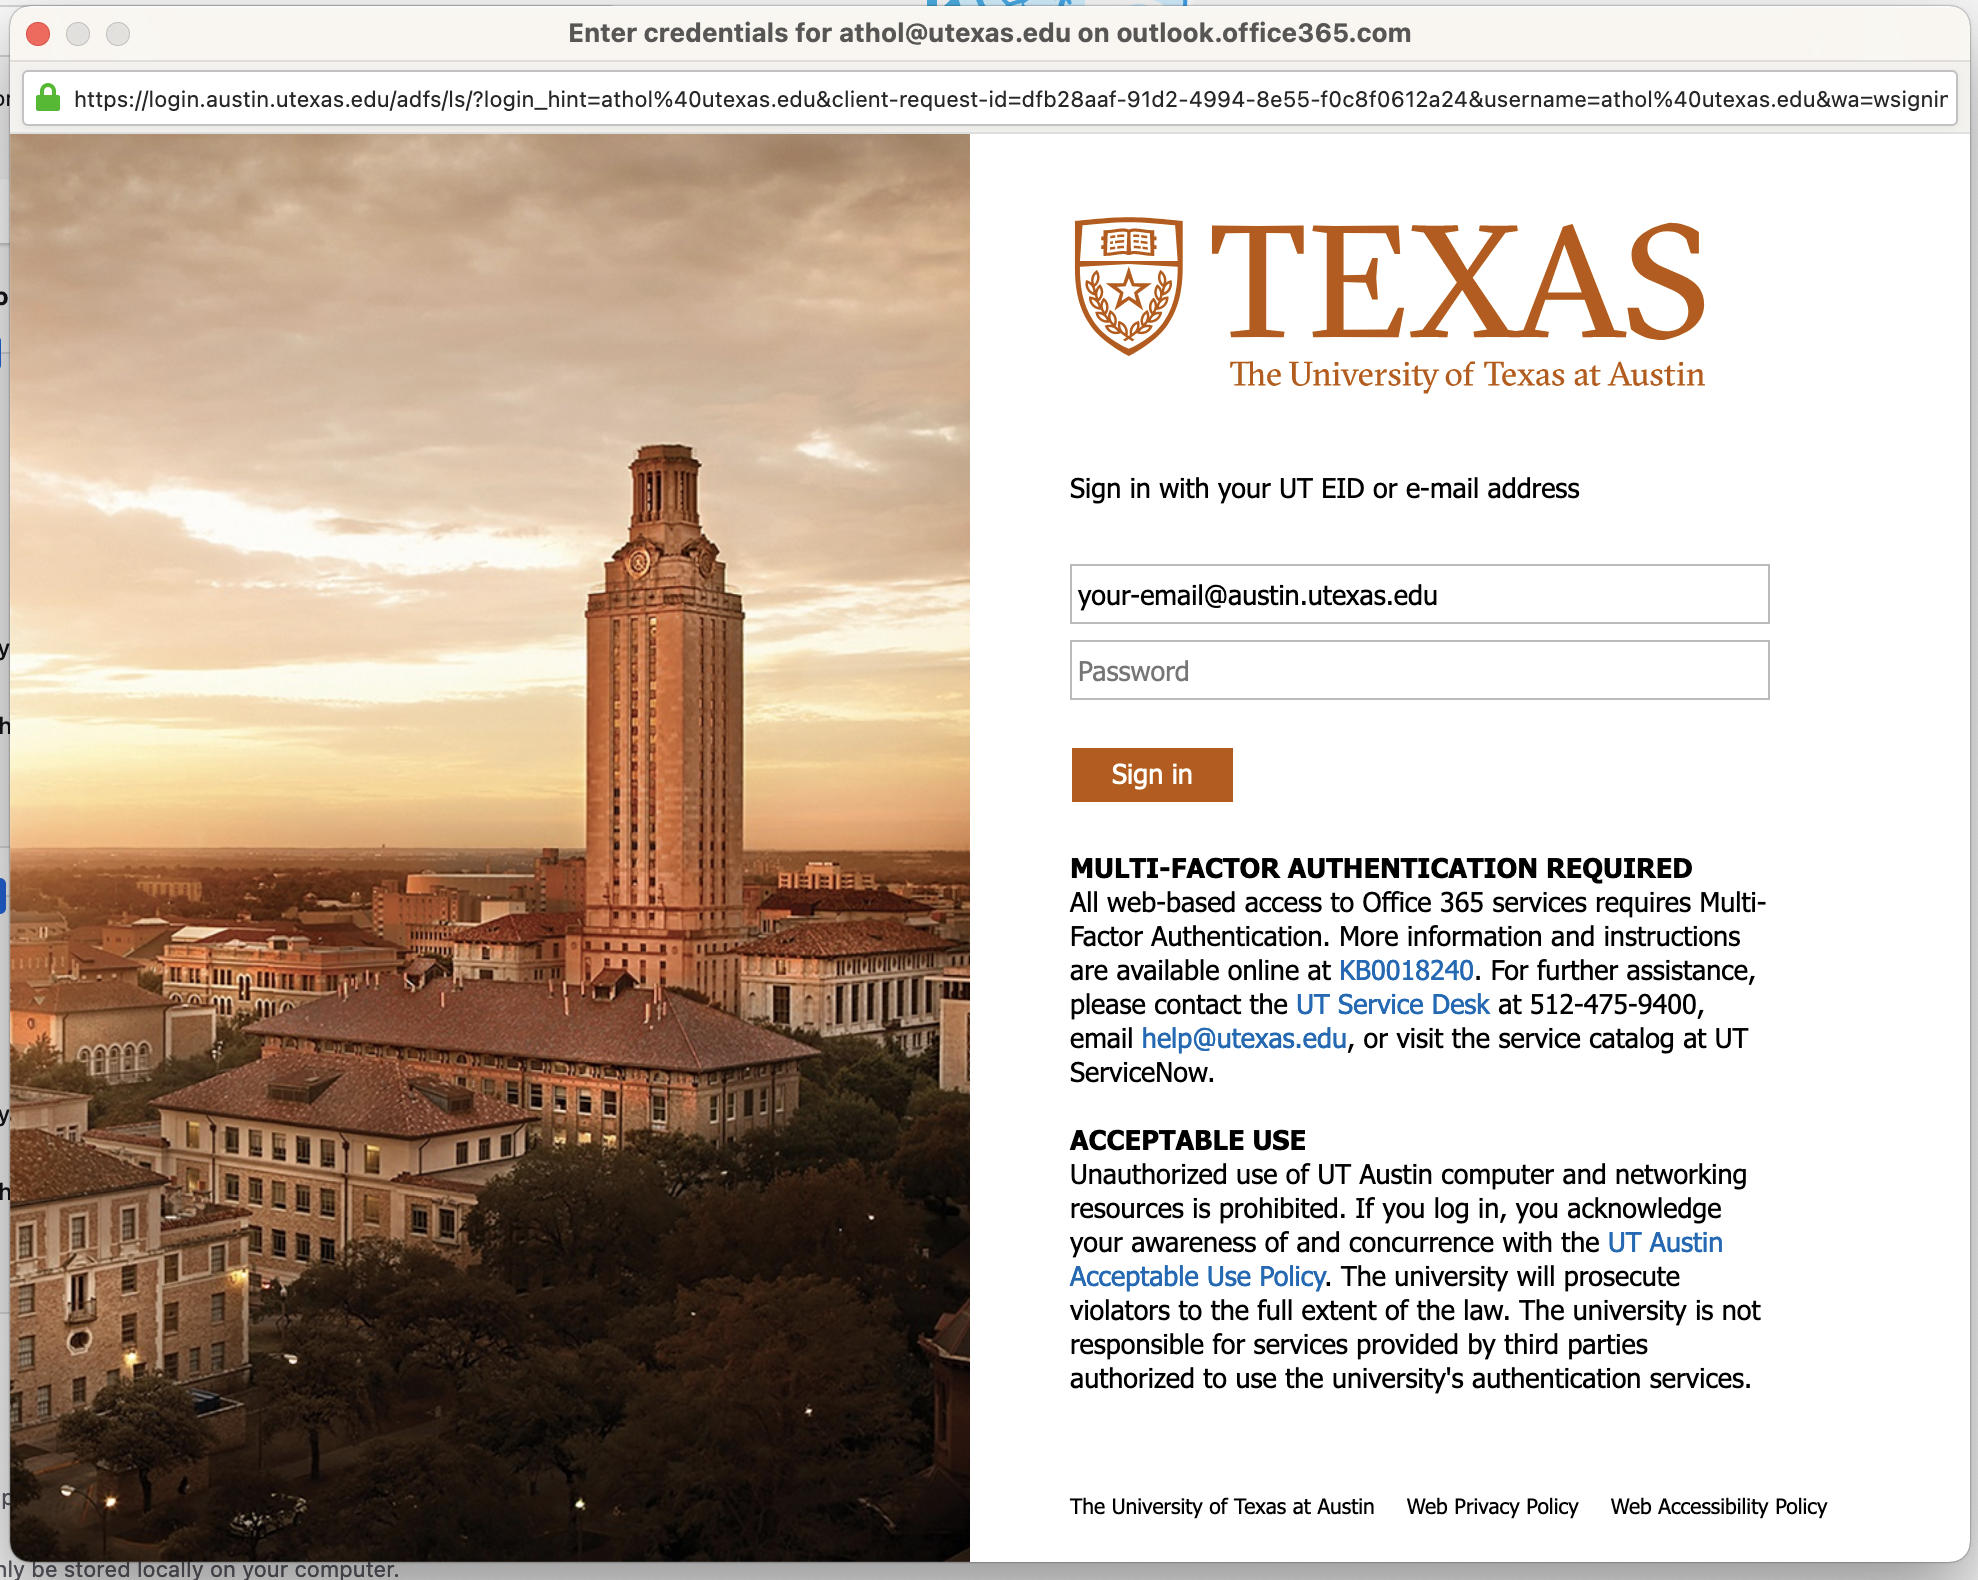 The UT Login Screen is shown. An image of the UT Tower is on the left half with authentication fields on the right below the UT Austin logo. 